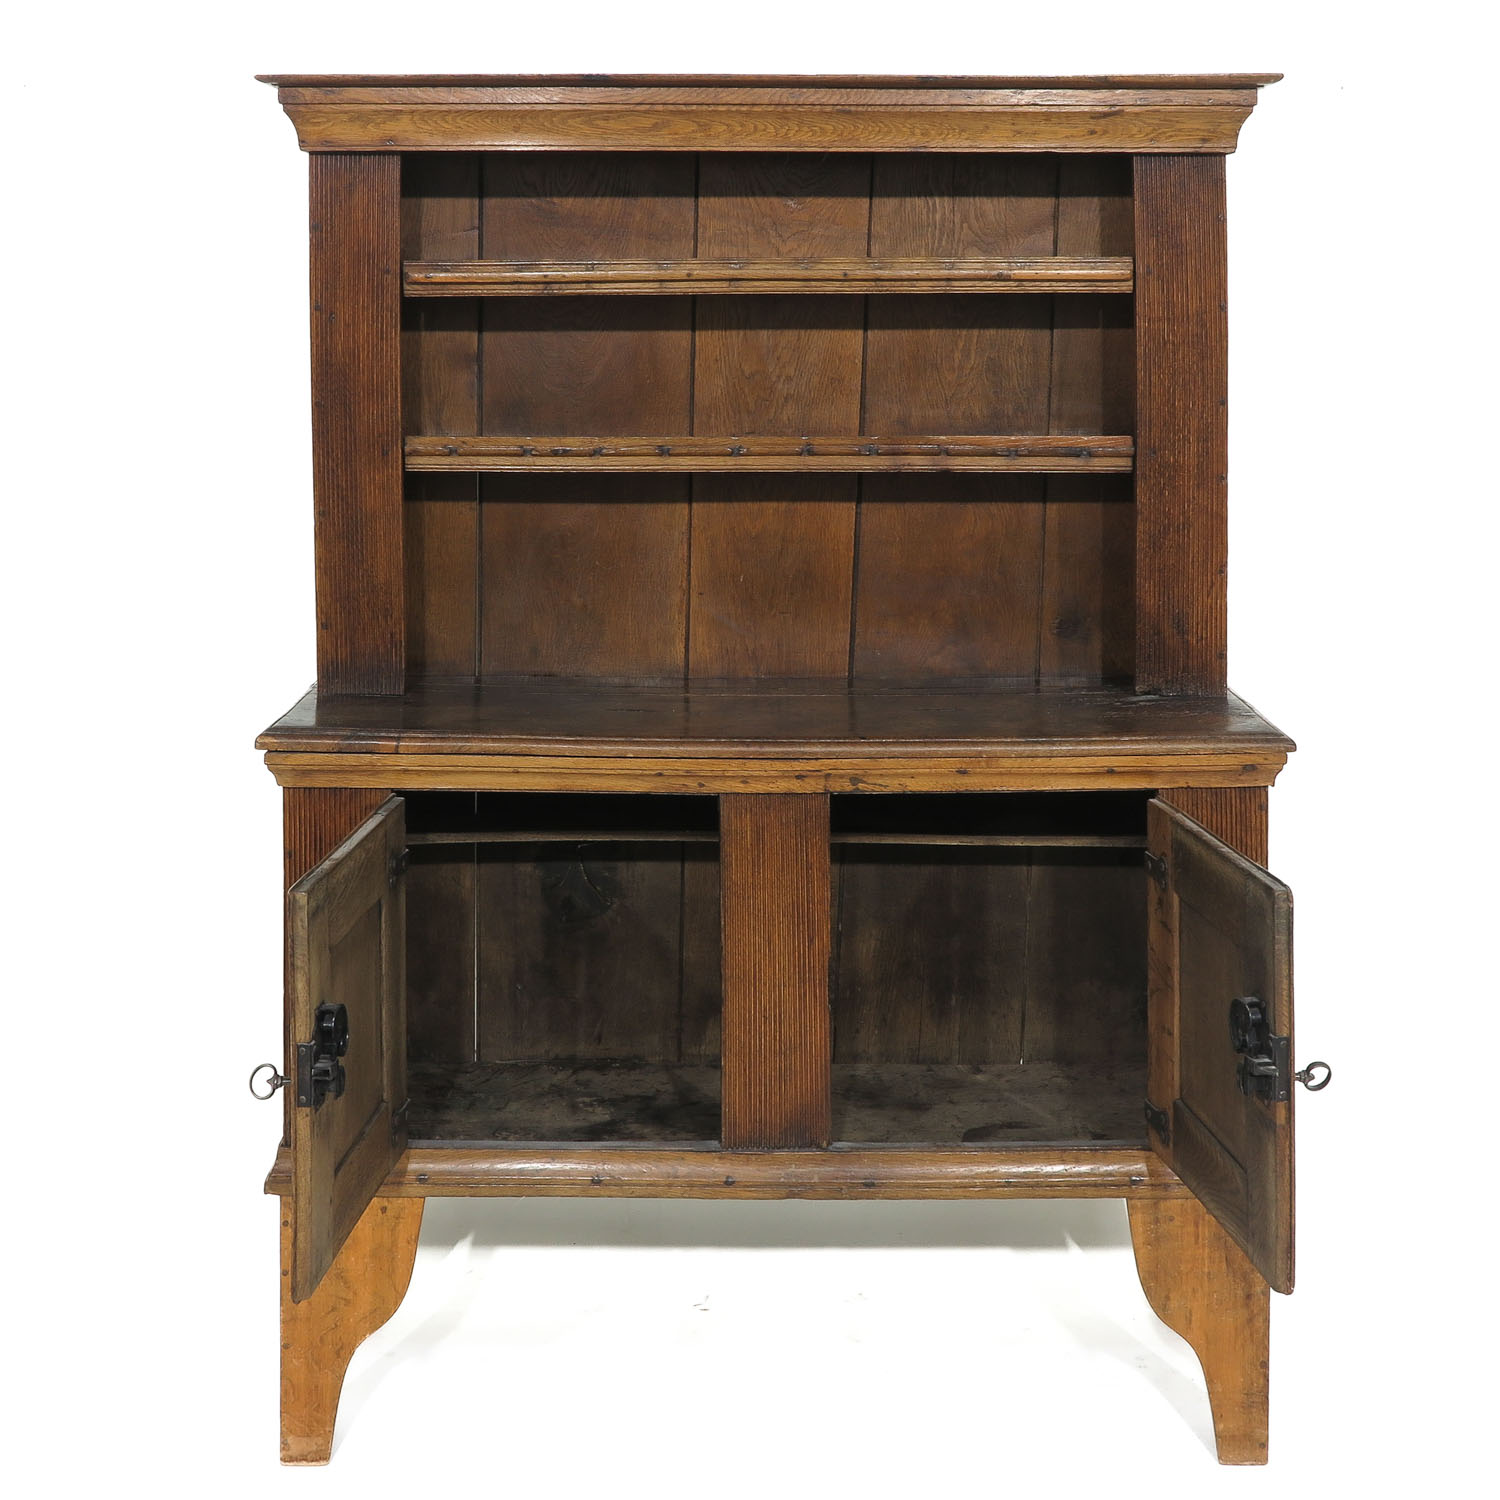 A Collection of Antique Oak Furniture - Image 5 of 10